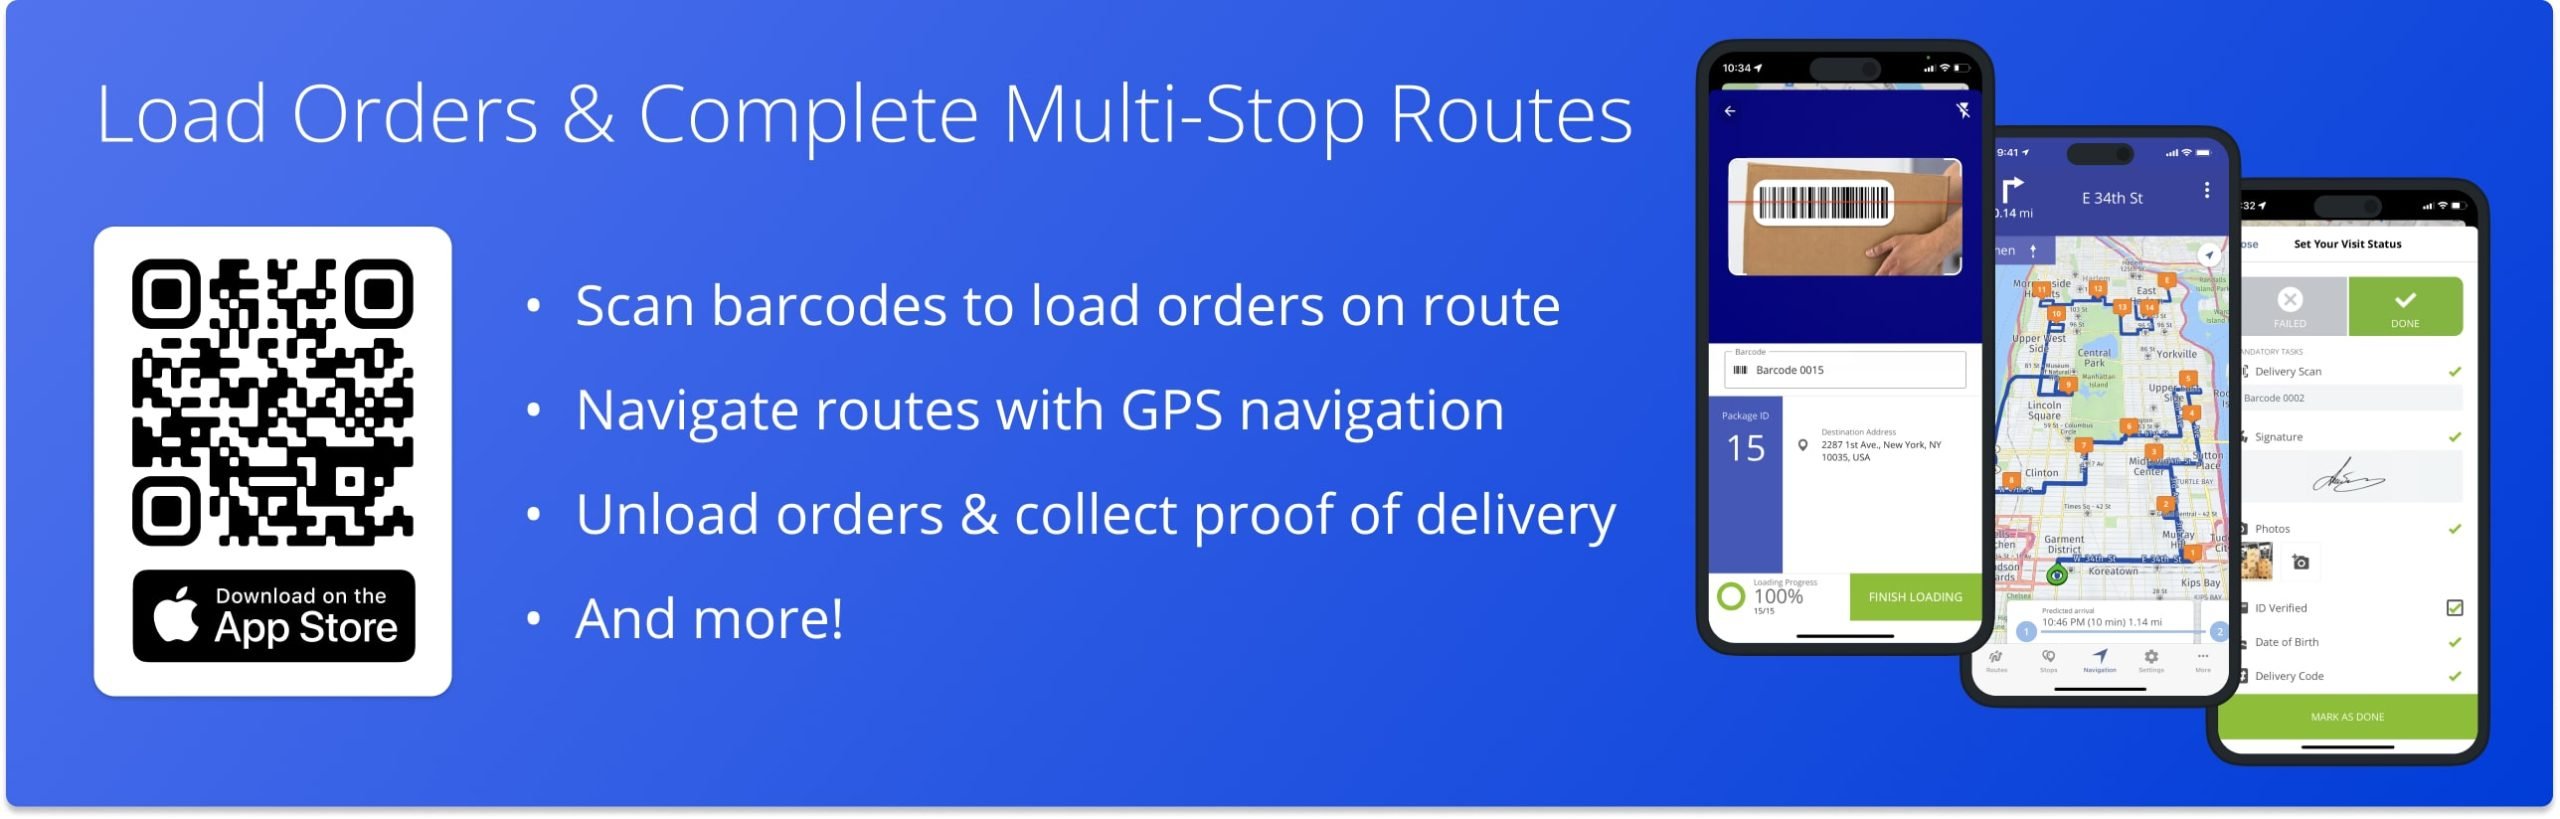 Load and unload orders using Route4Me's Route Planner Barcode Scanner to complete delivery routes.